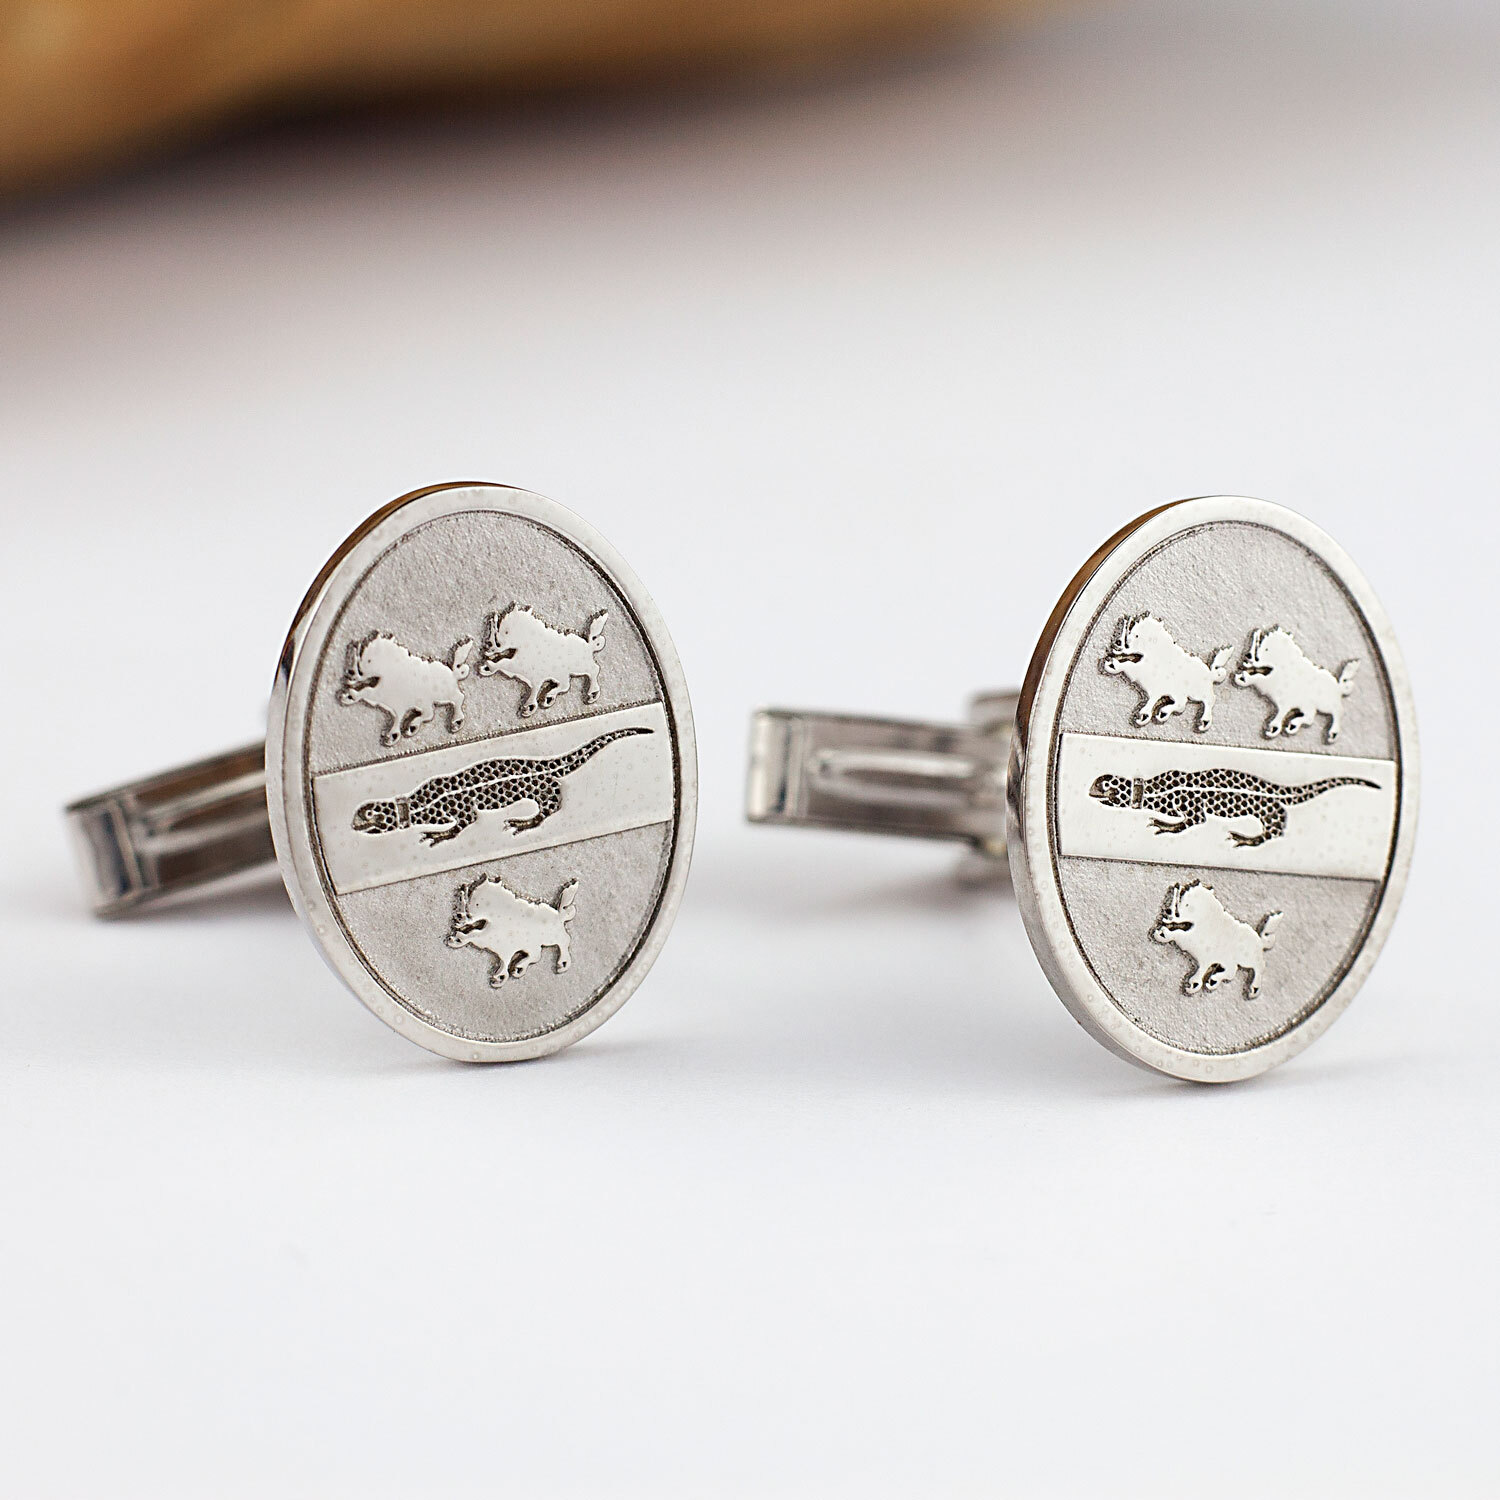 Seton Scotland Family Crest Surname Coat Of Arms Gold Cufflinks Engraved Box